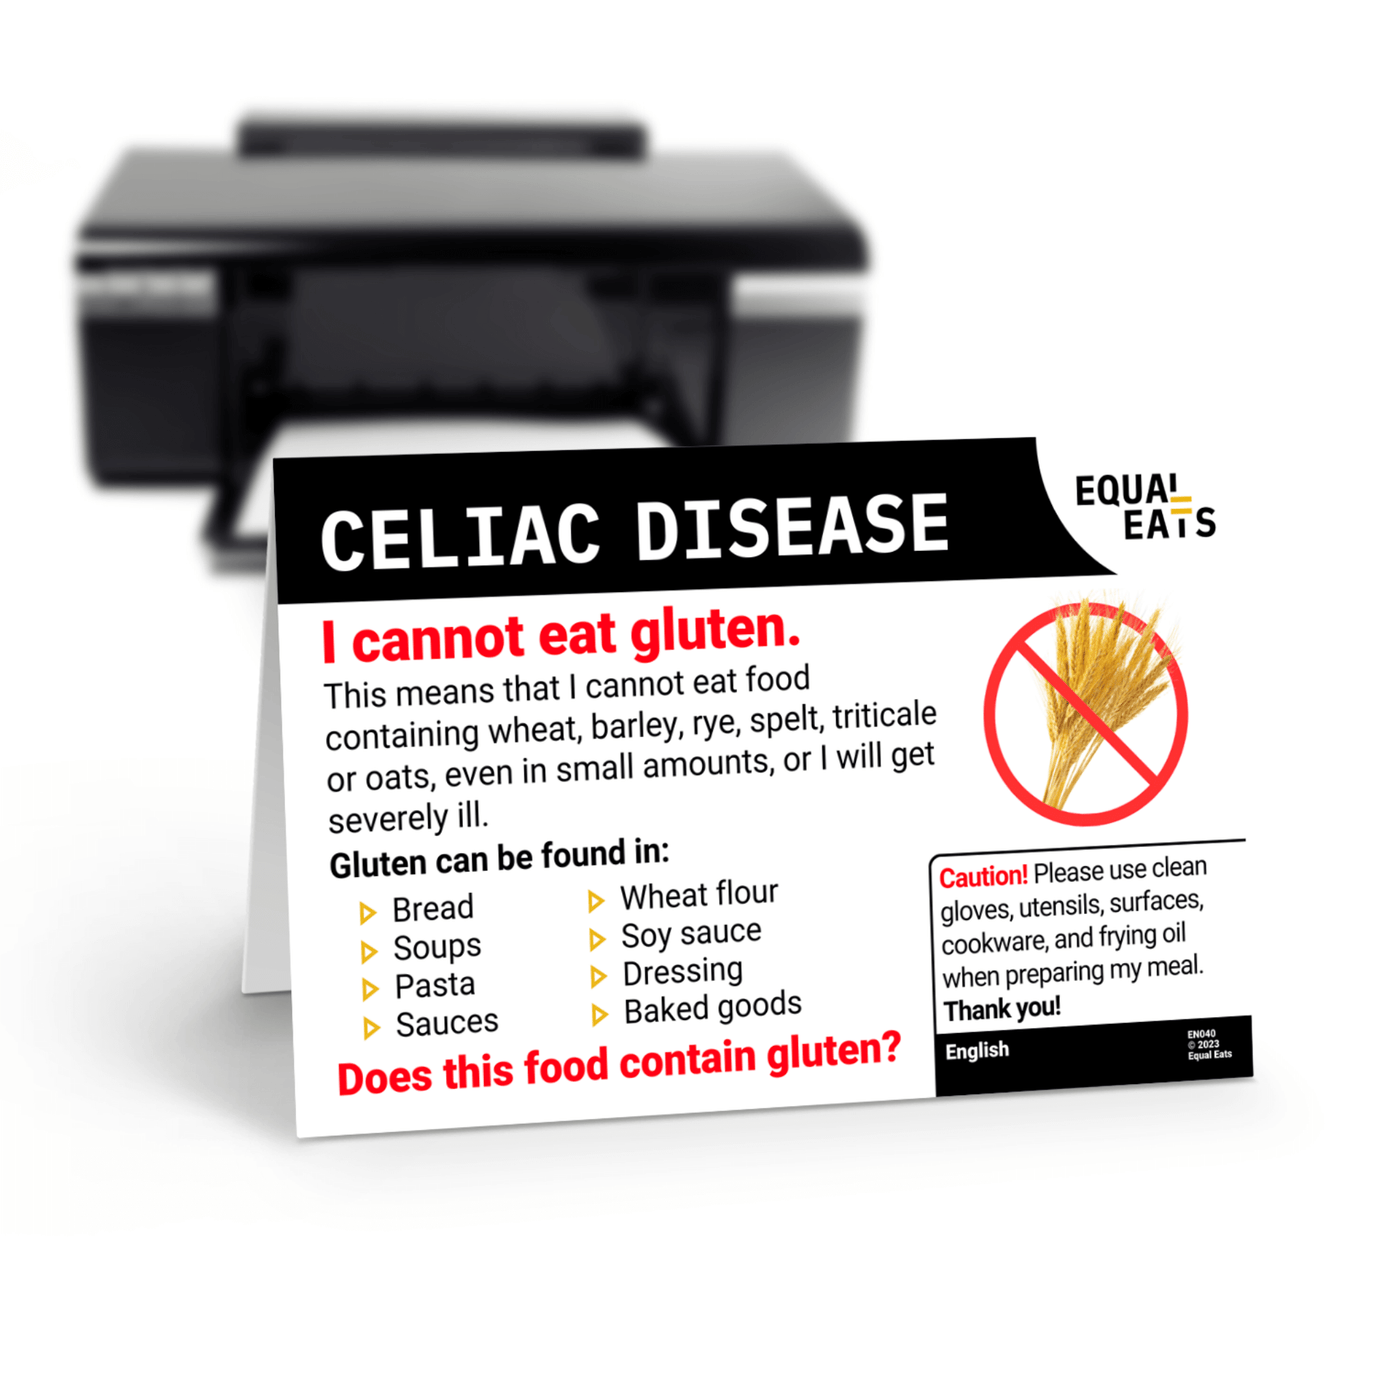 Printable Celiac Card in Lao (Instant Download)